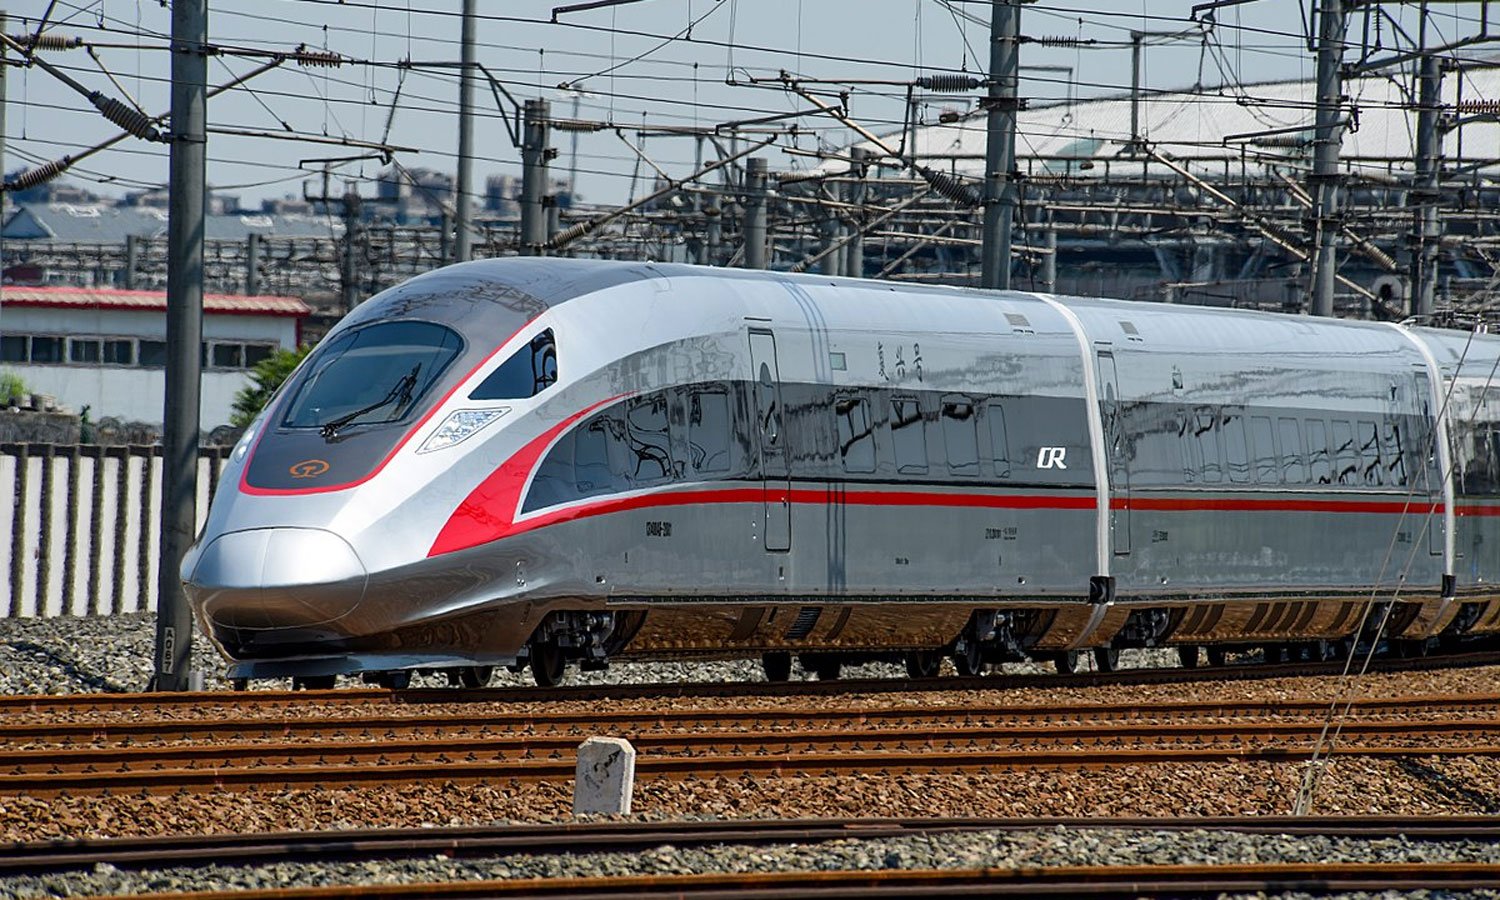 This is the world's fastest train traveling on a conventional track / Image courtesy of Wikipedia